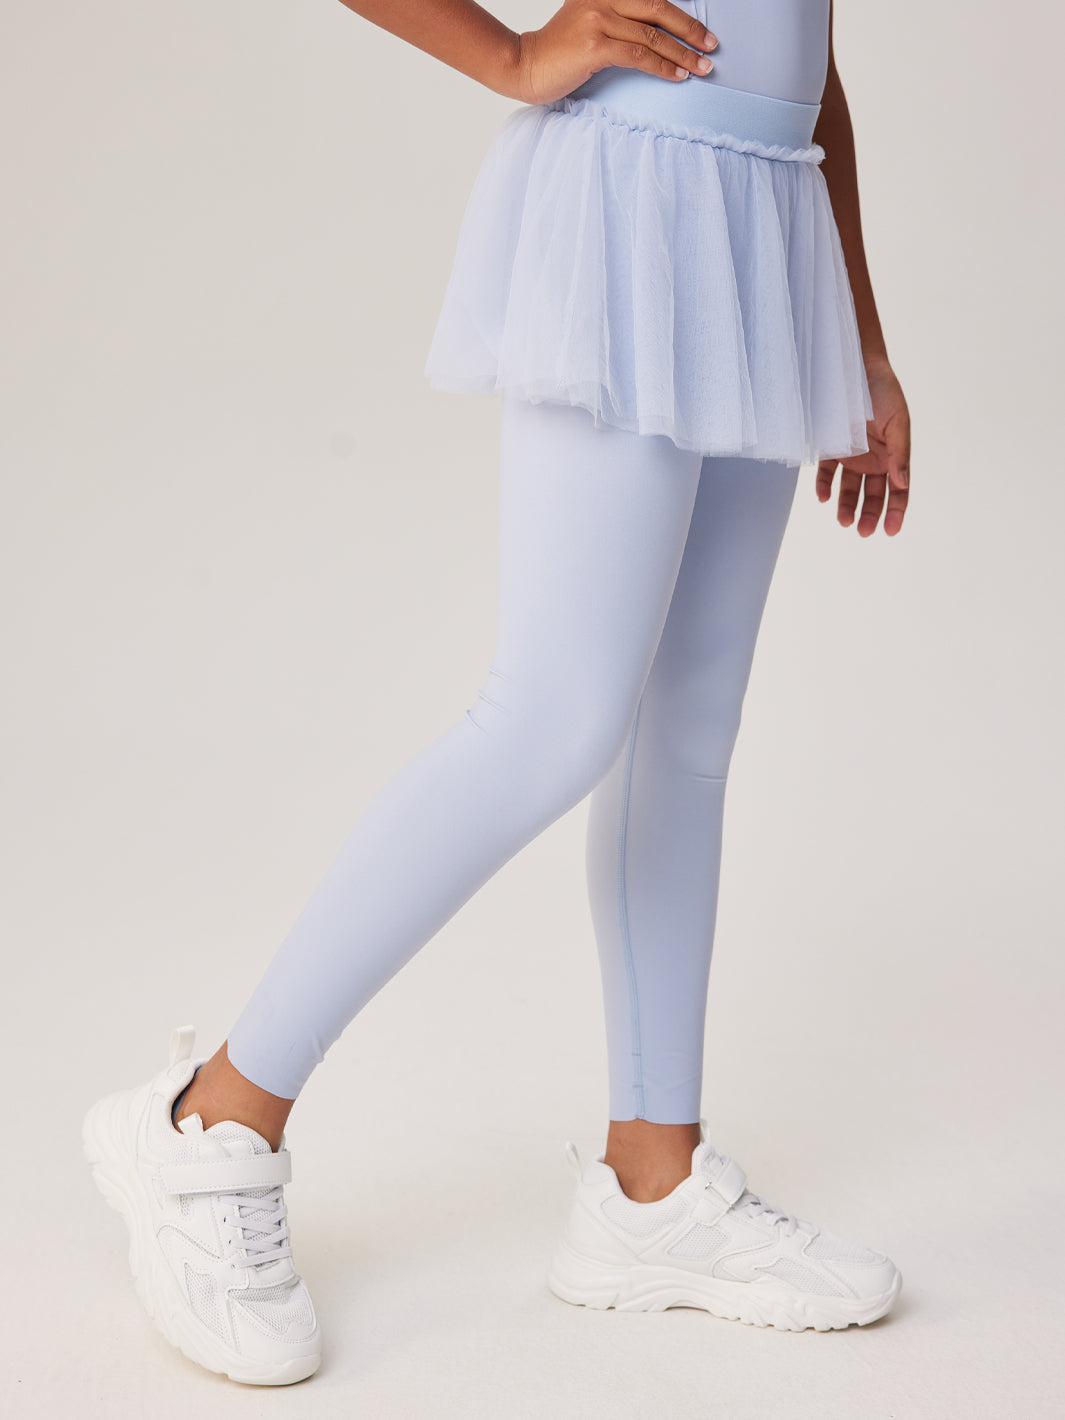 3-layers Lace Pleated Skirted Leggings